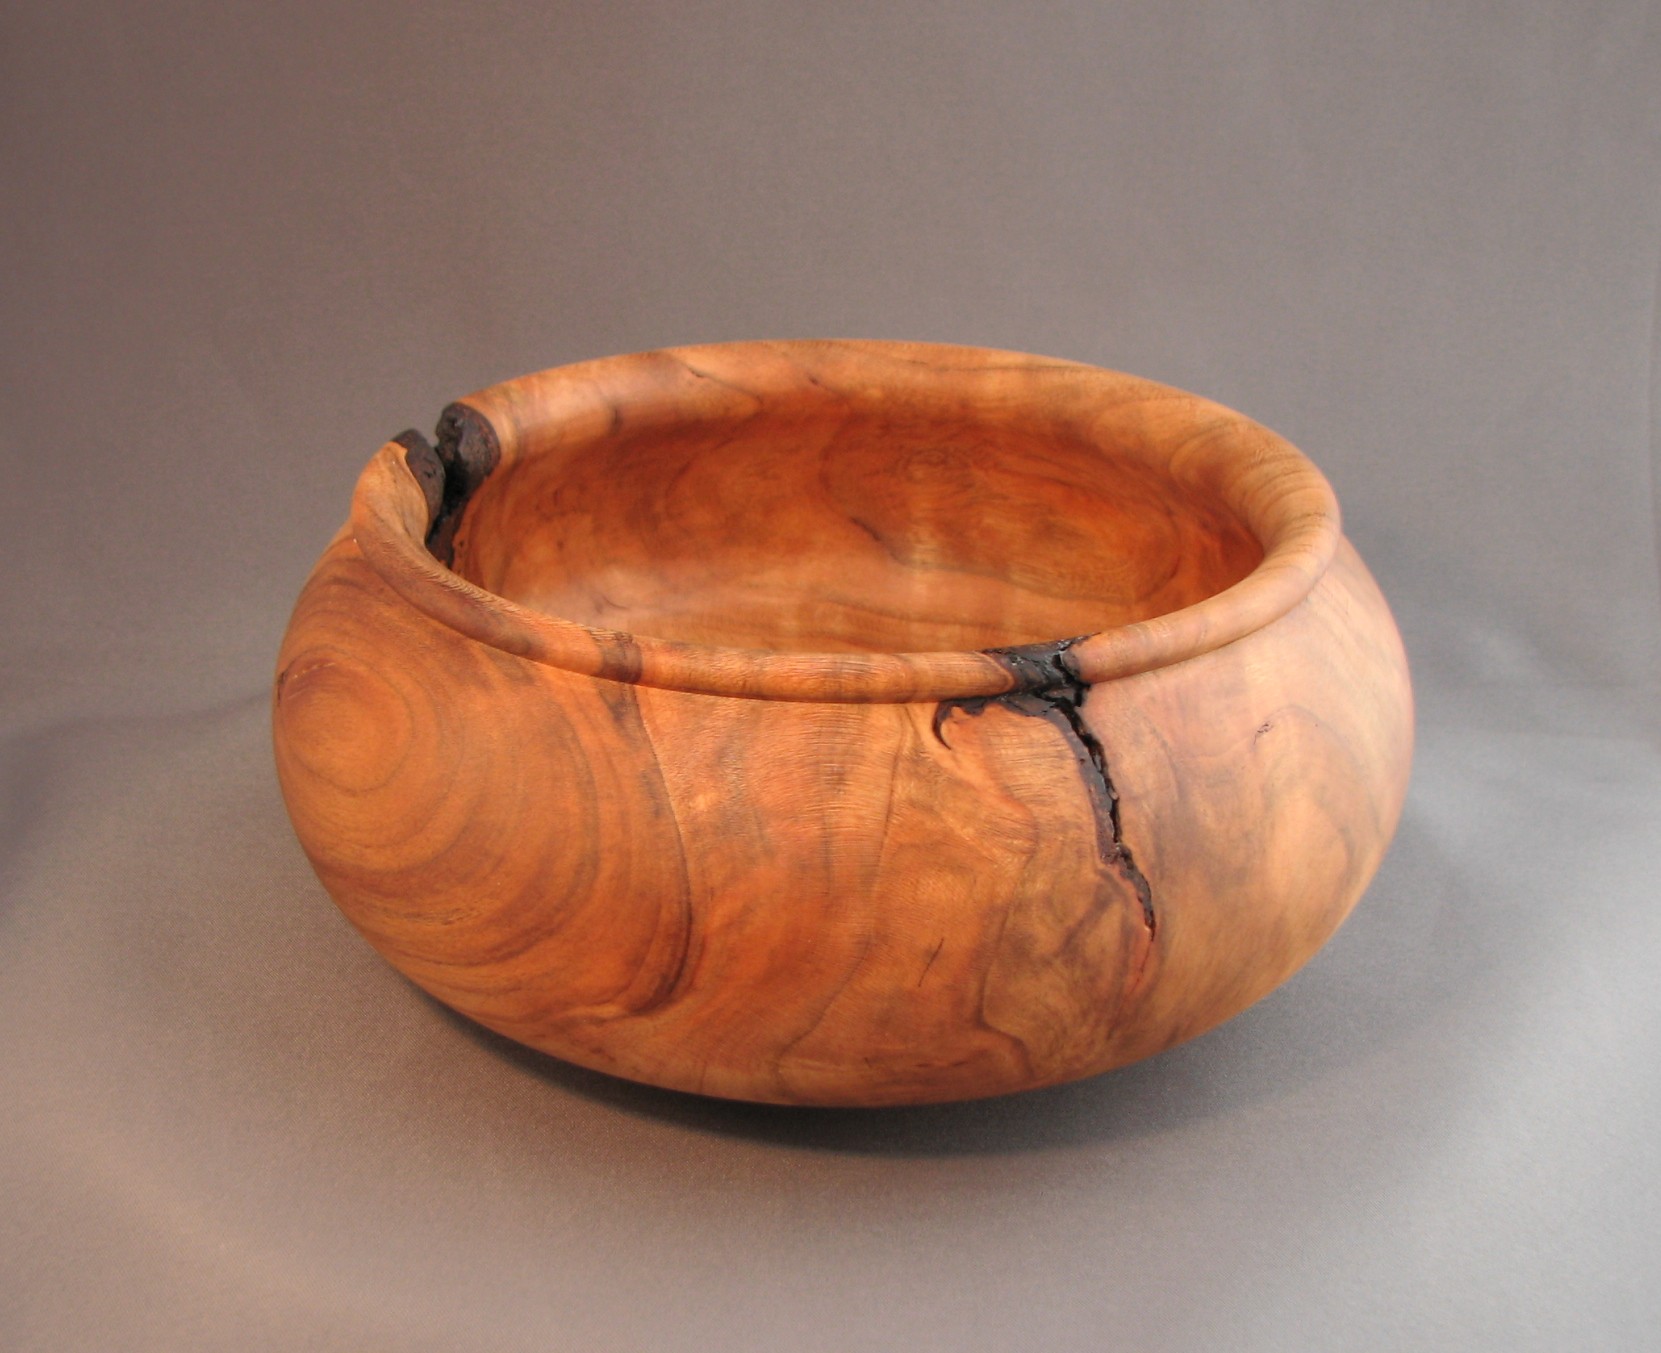 Cherry Bowl with bark inclusion